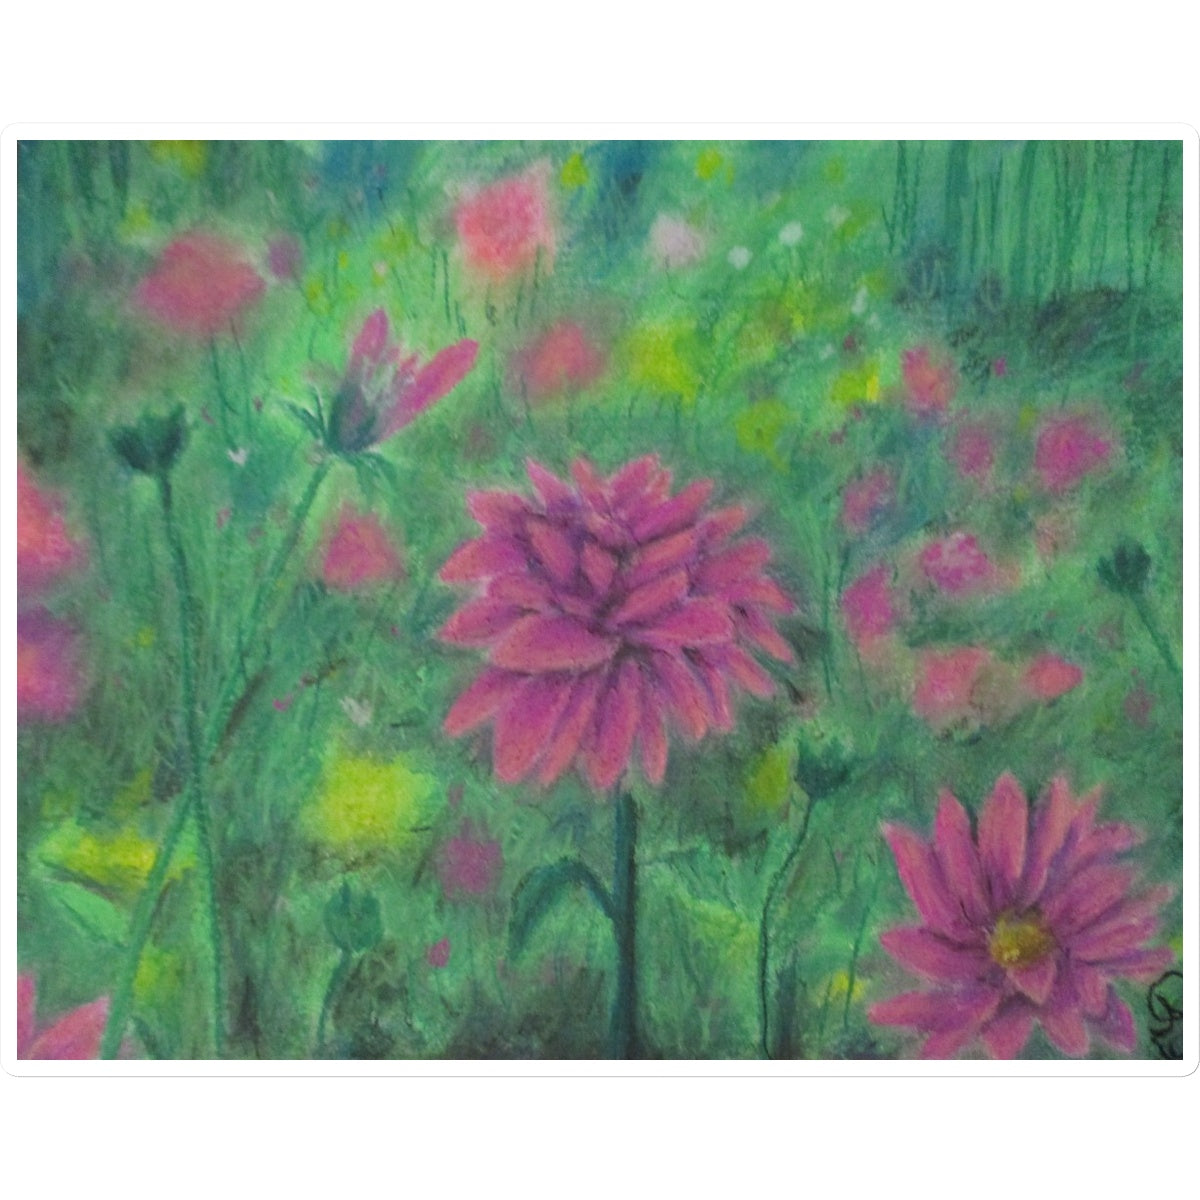 Poet and her Soul Speaking Paintings ~ prints, originals and more  In the fields wild flowers grow A playful colour flow Hiding peeking spreading light Across the lands and out of sight  Original Artwork and Poetry of Artist Jen Shearer  This is a original painting printed on product